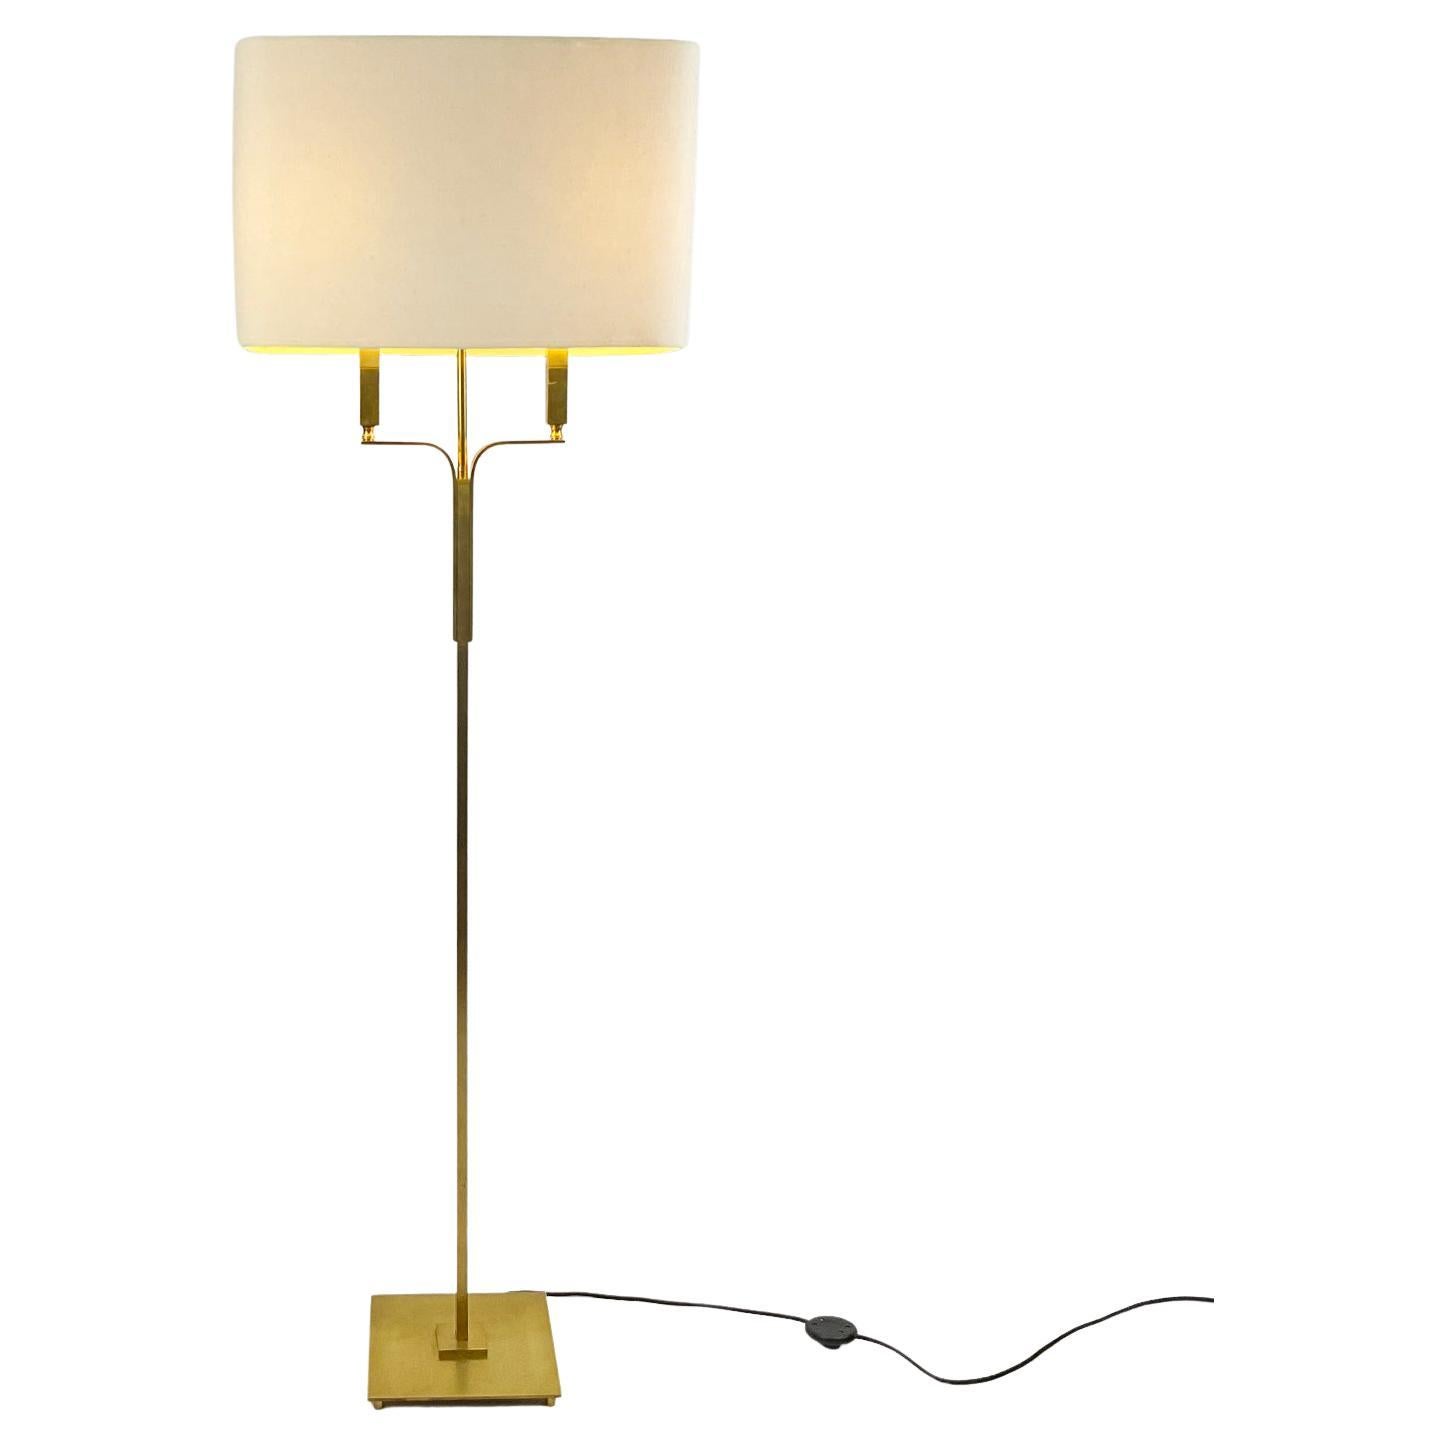 1970s French Floor Lamp in Brushed Brass